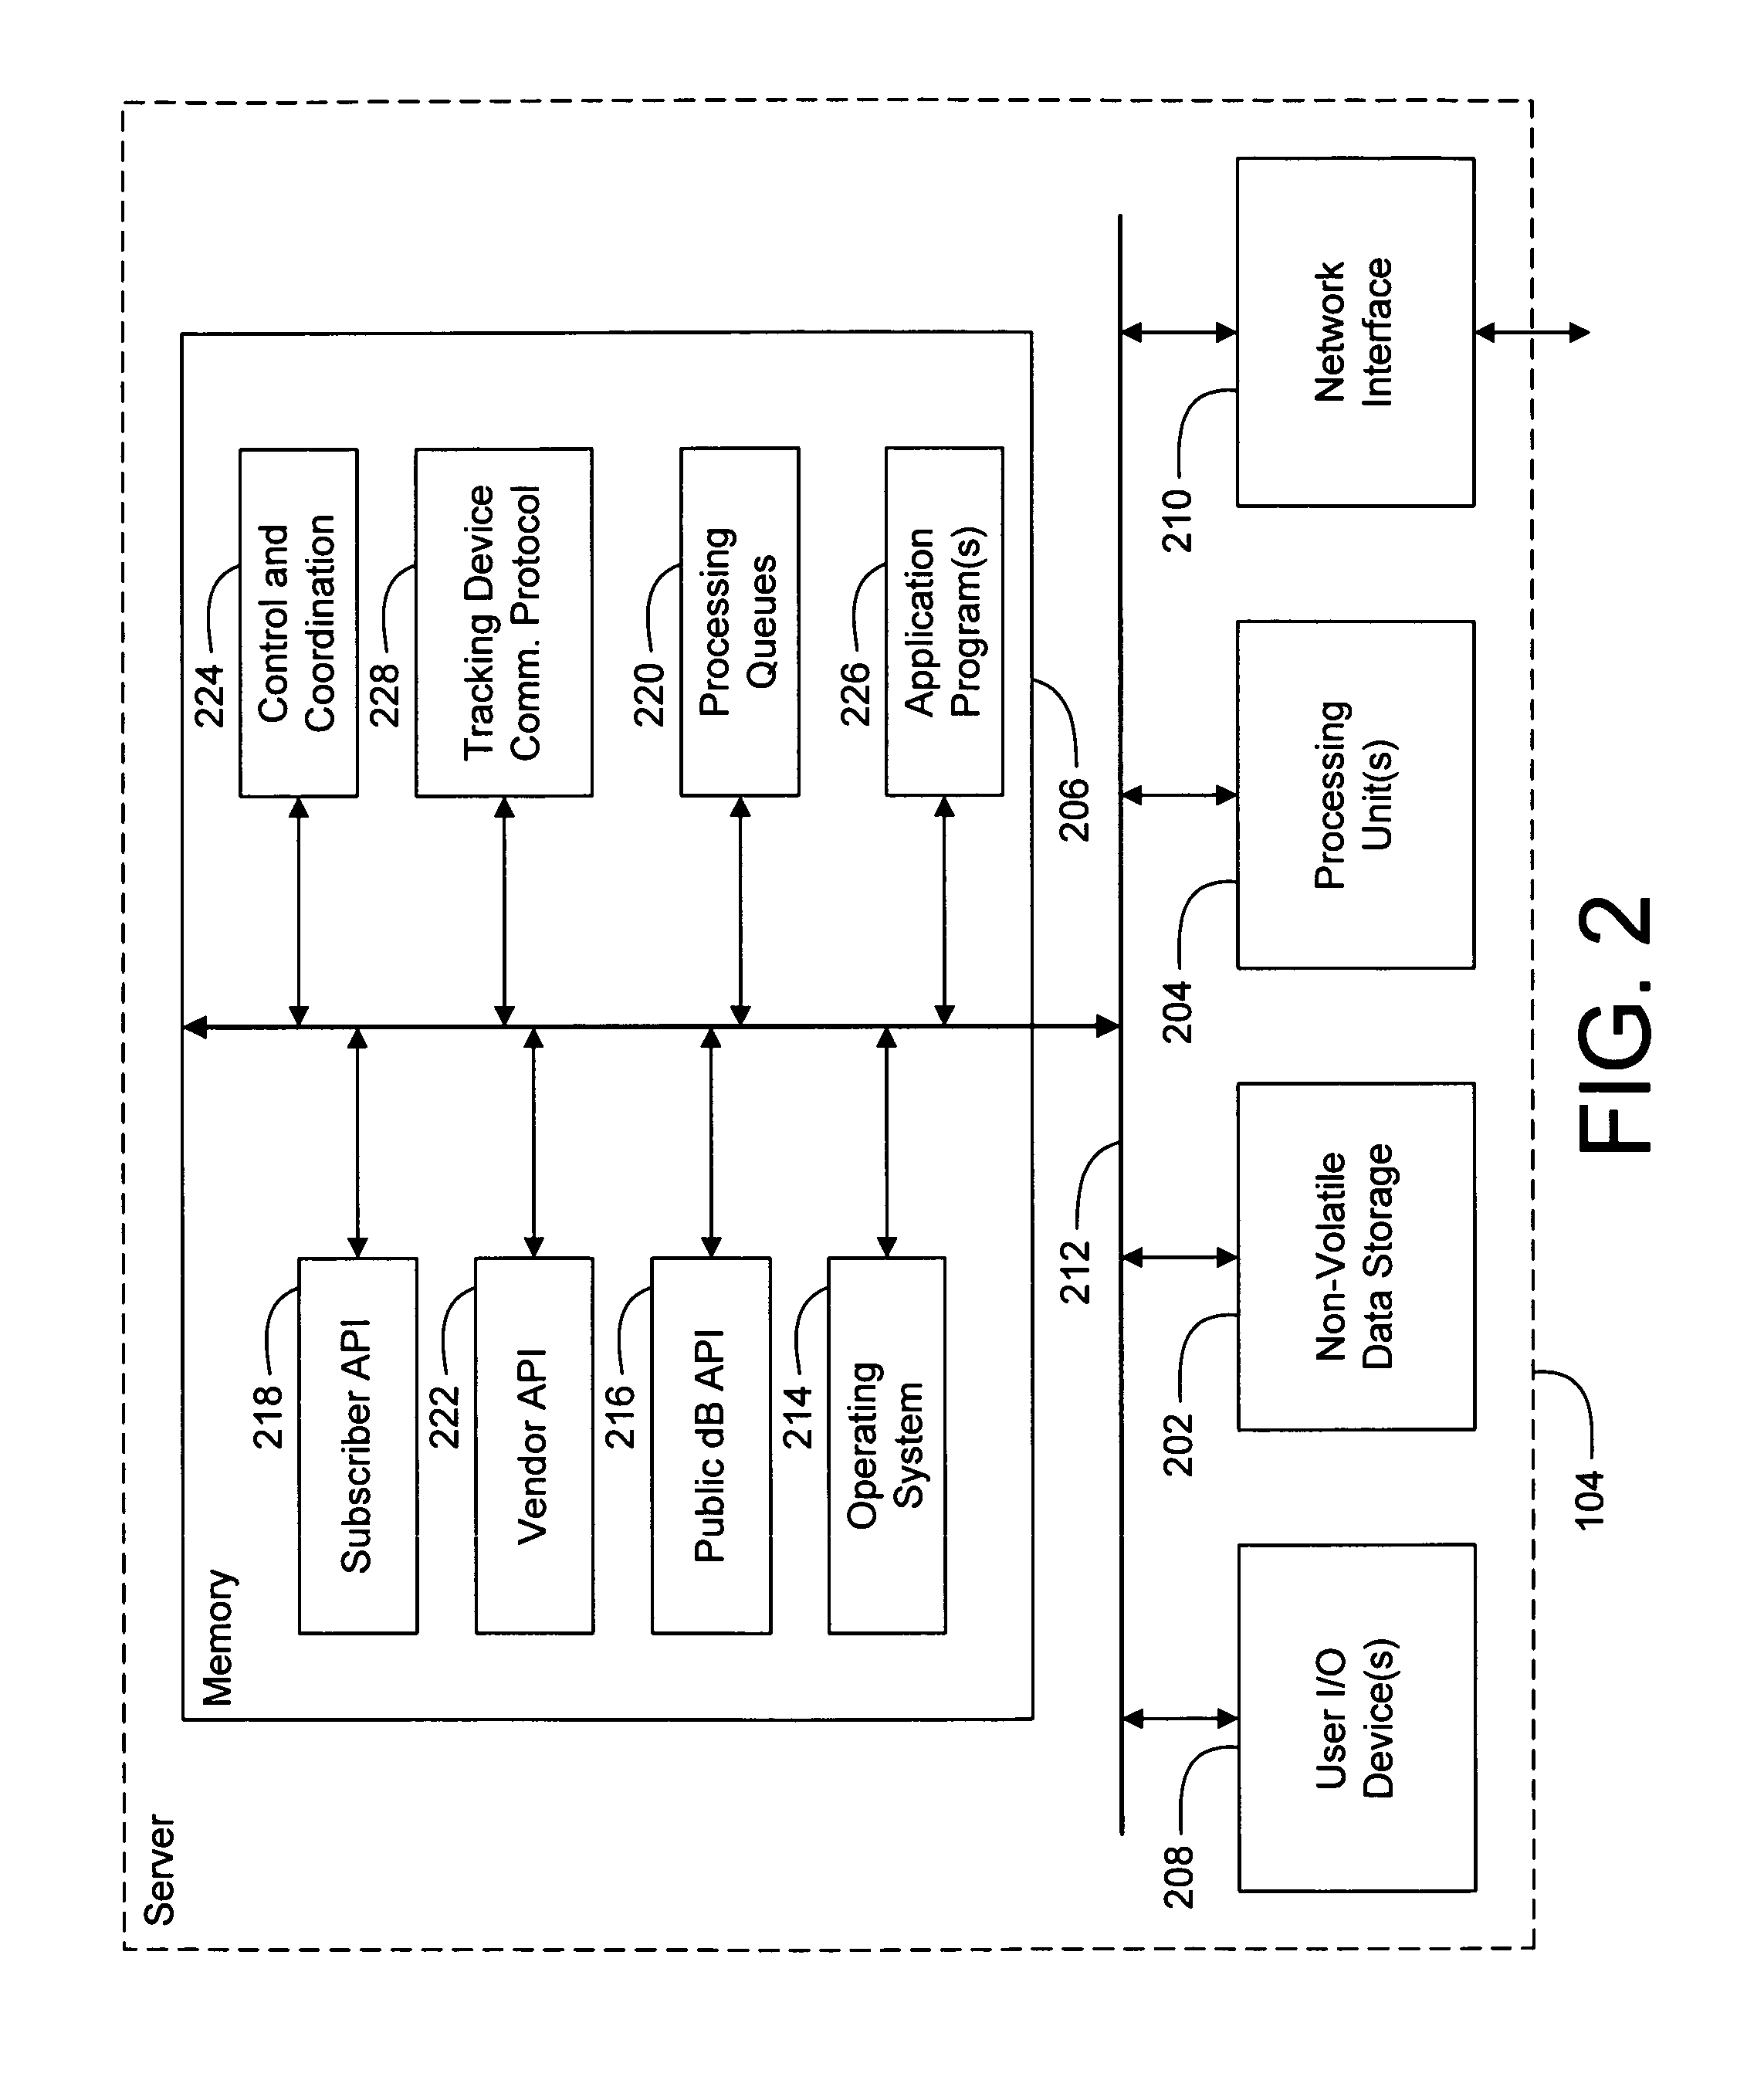 System and method for communication with a tracking device